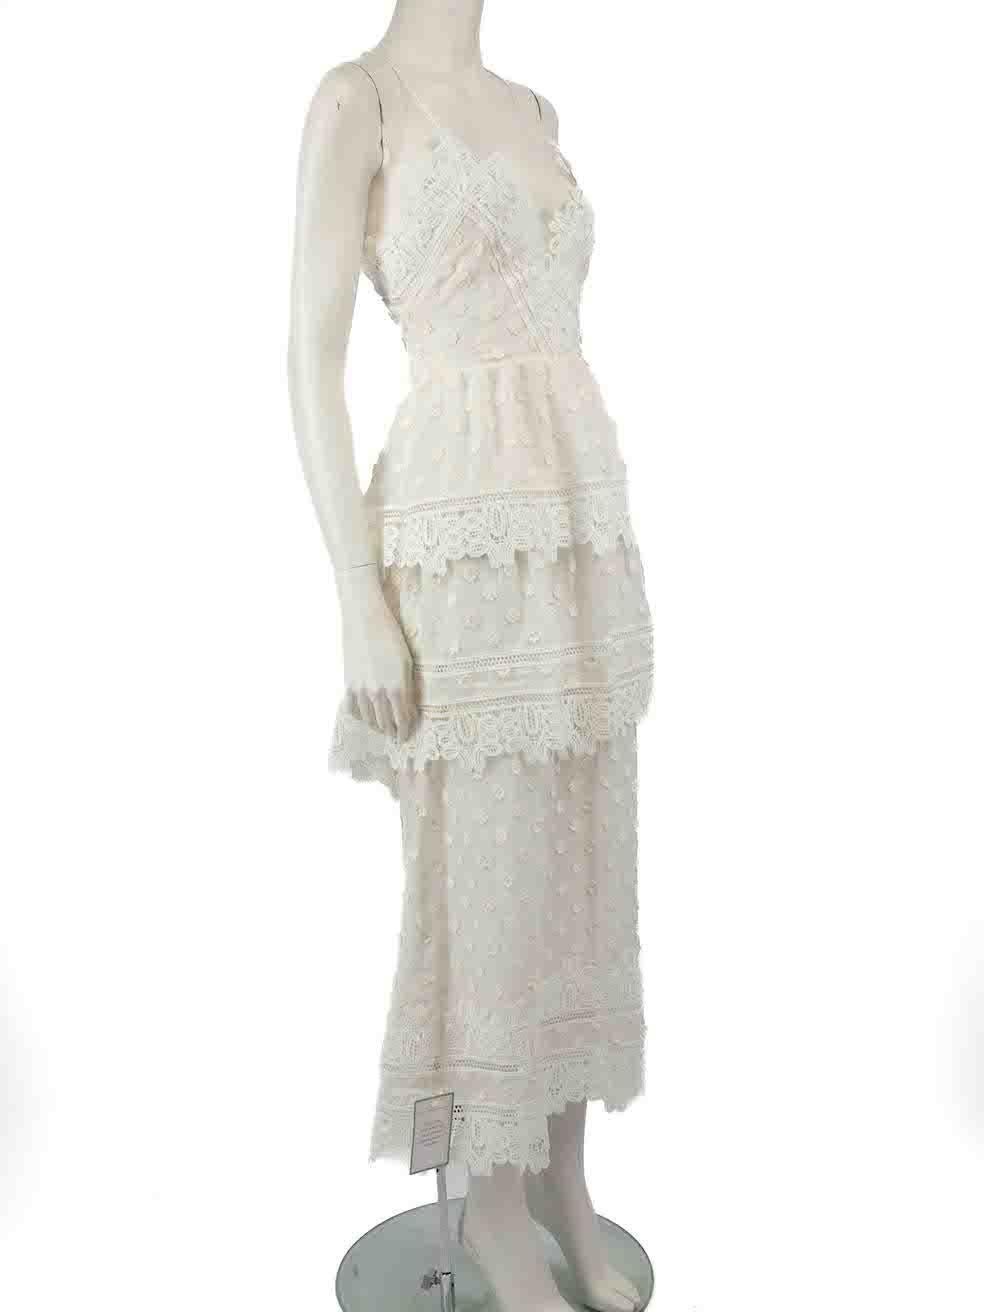 CONDITION is Never worn, with tags. No visible wear to dress is evident on this new Self Portrait designer resale item.
 
 
 
 Details
 
 
 Ivy model
 
 White
 
 Cotton
 
 Midi dress
 
 Floral lace accent
 
 V neckline
 
 Cut out back detail
 
 Lace